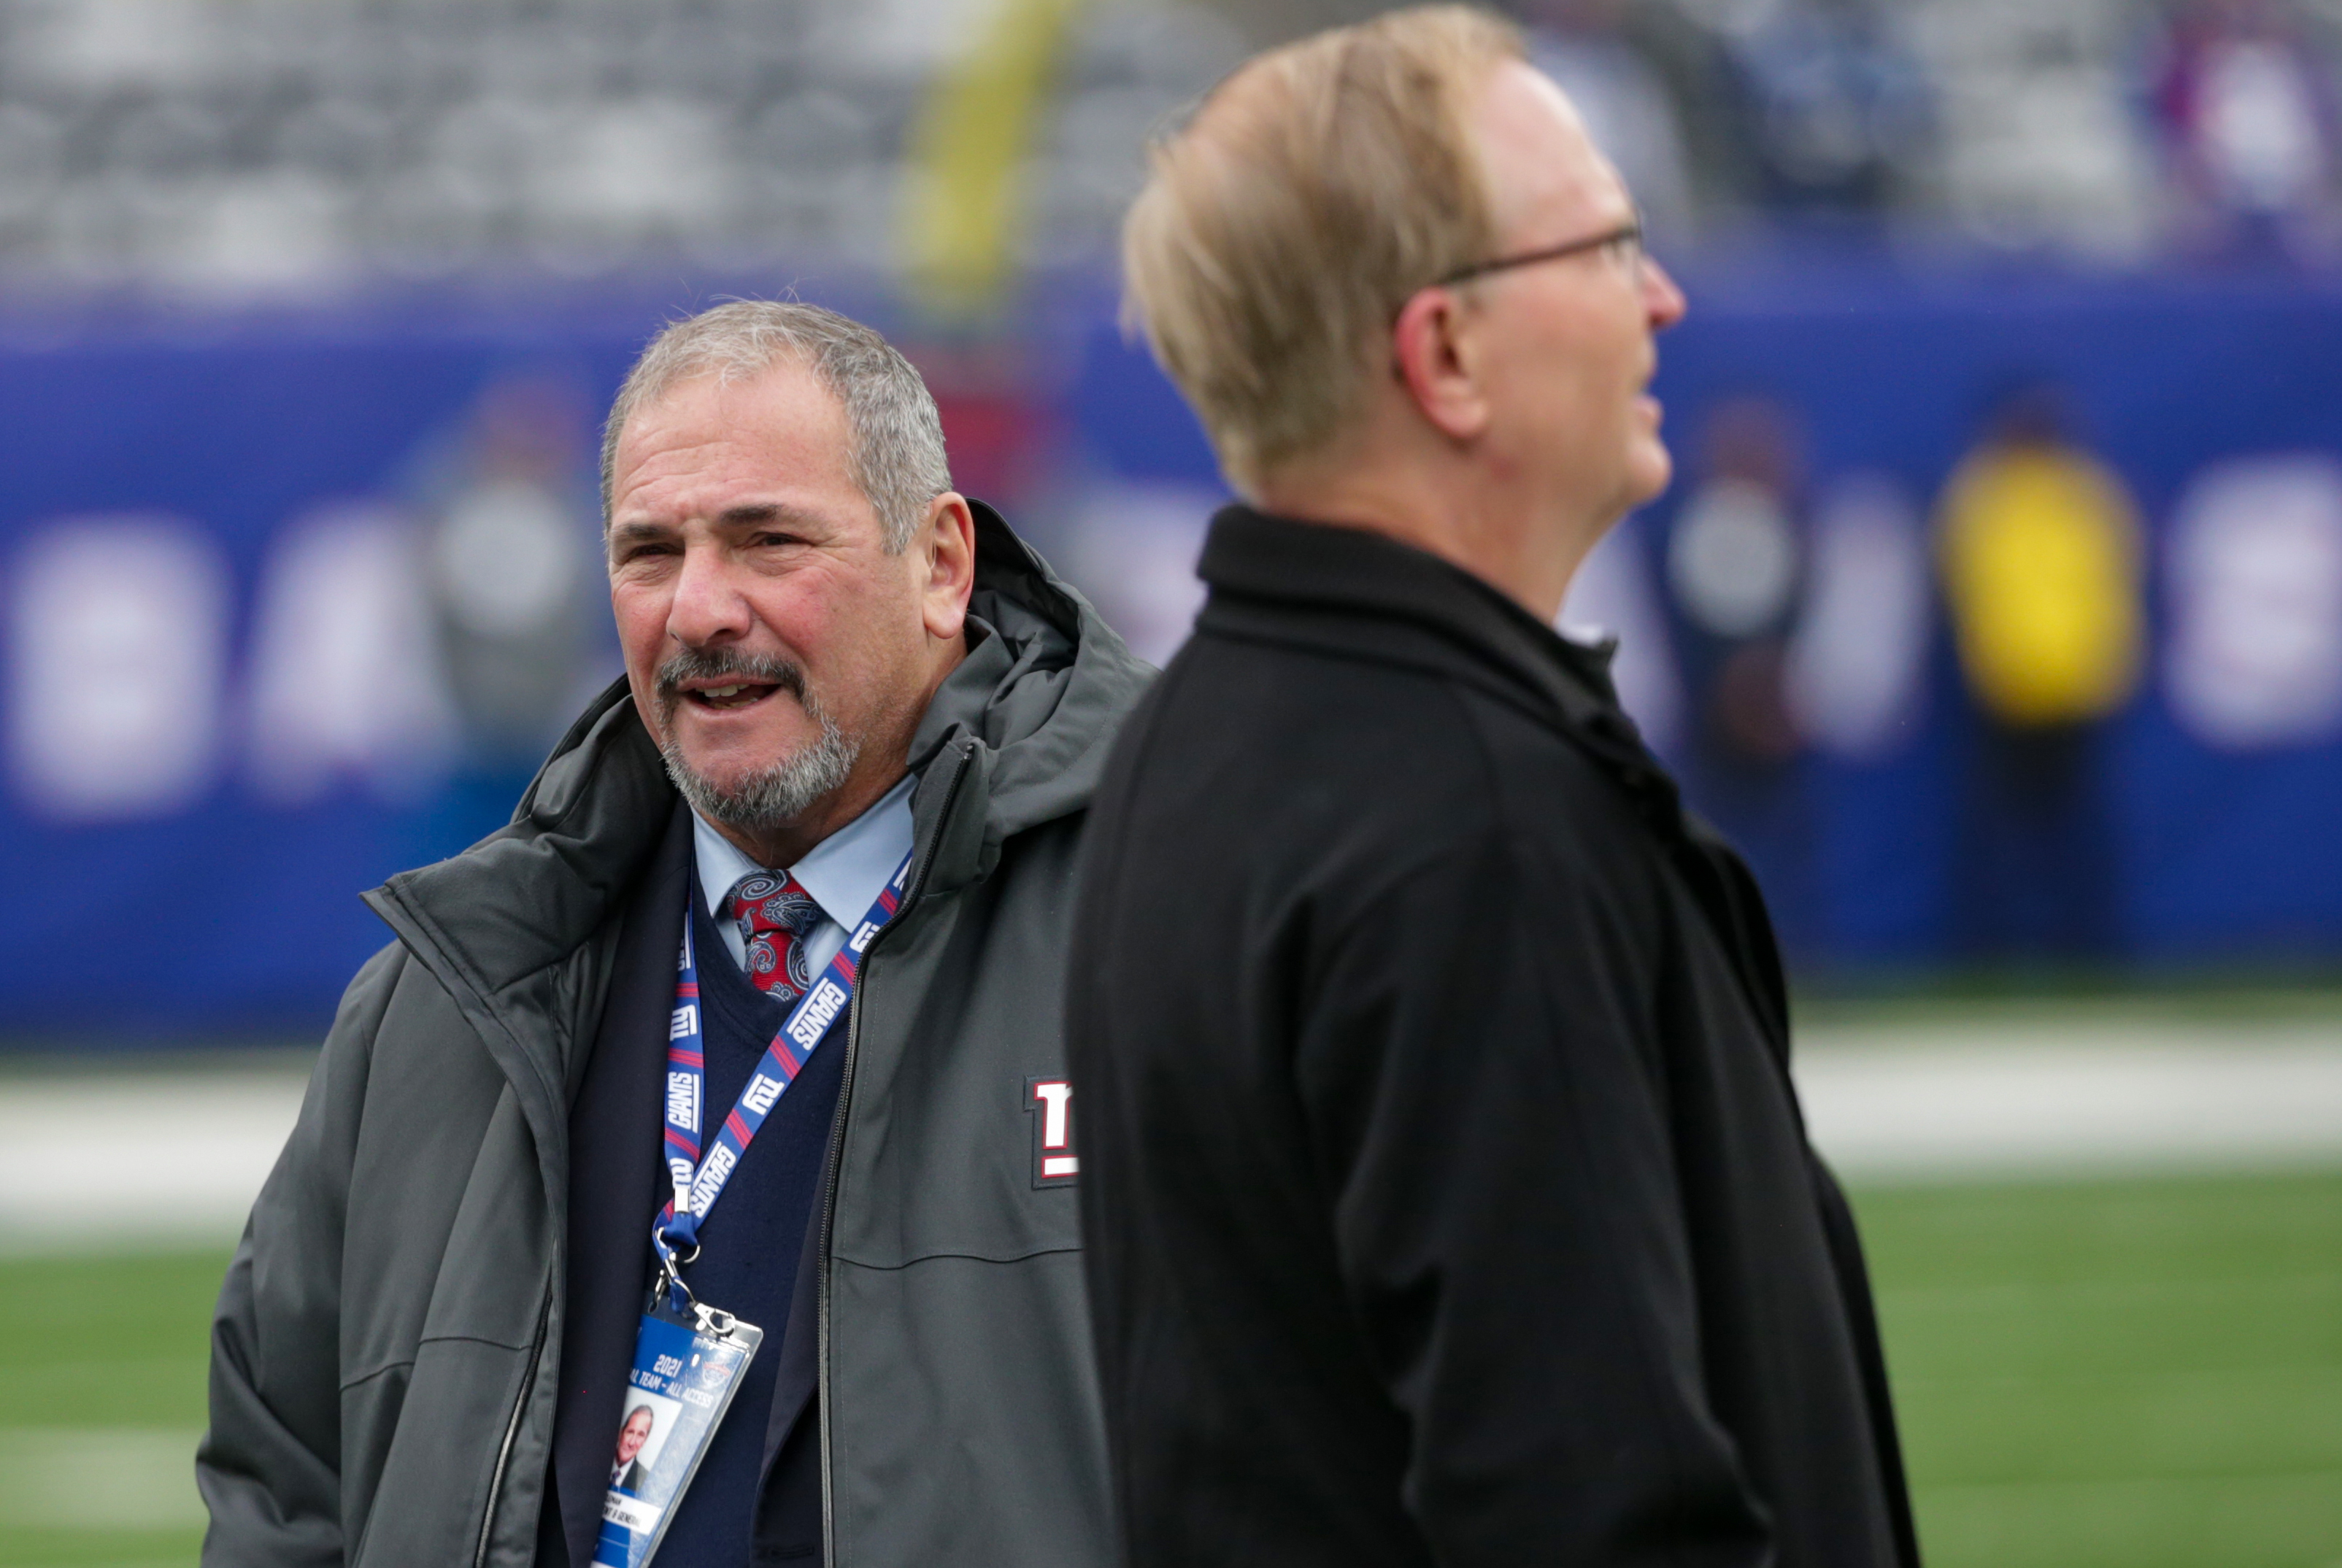 New York Giants general manager Dave Gettleman and owner John Mara during pregame warmups as the Giants prepare to host the Washington Football Team on Sunday, Jan. 9, 2022 in East Rutherford, N.J.